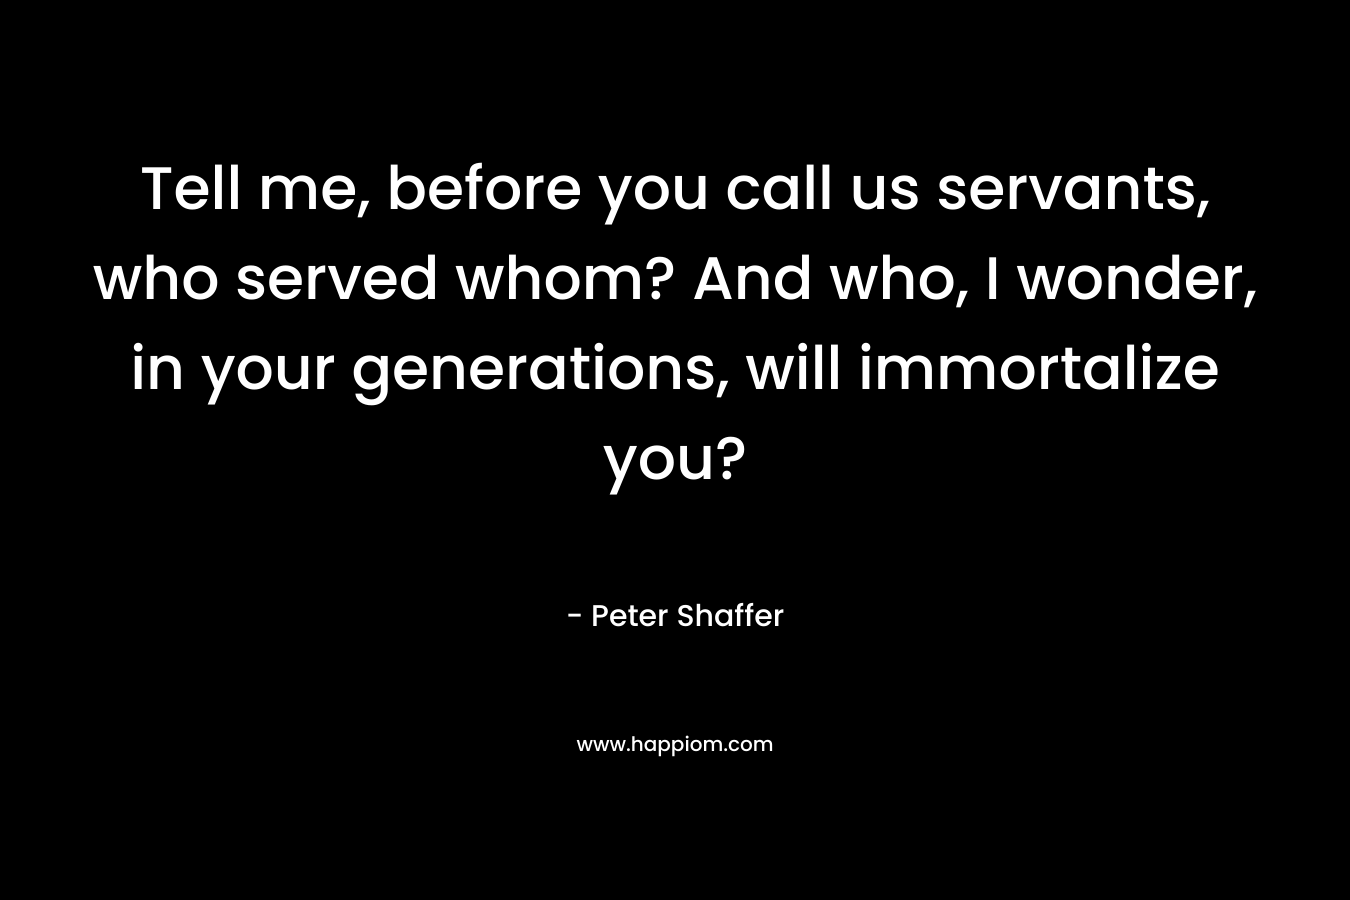 Tell me, before you call us servants, who served whom? And who, I wonder, in your generations, will immortalize you? – Peter Shaffer